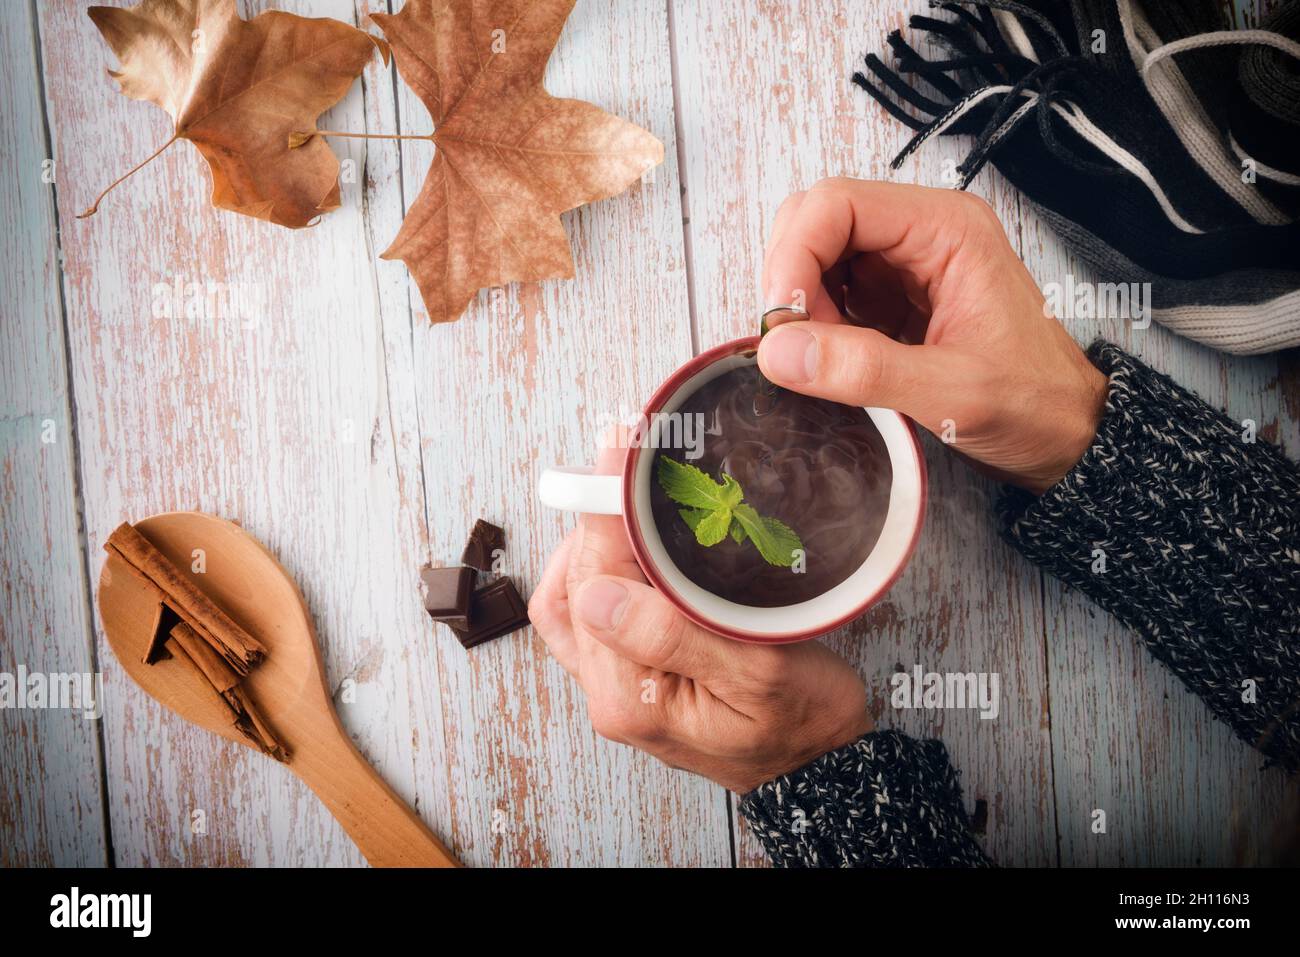 Cold hands with wool sweater stirring hot chocolate in a mug on wooden table with chocolate and wooden spoon with cinnamon and scarf and dry leaves in Stock Photo